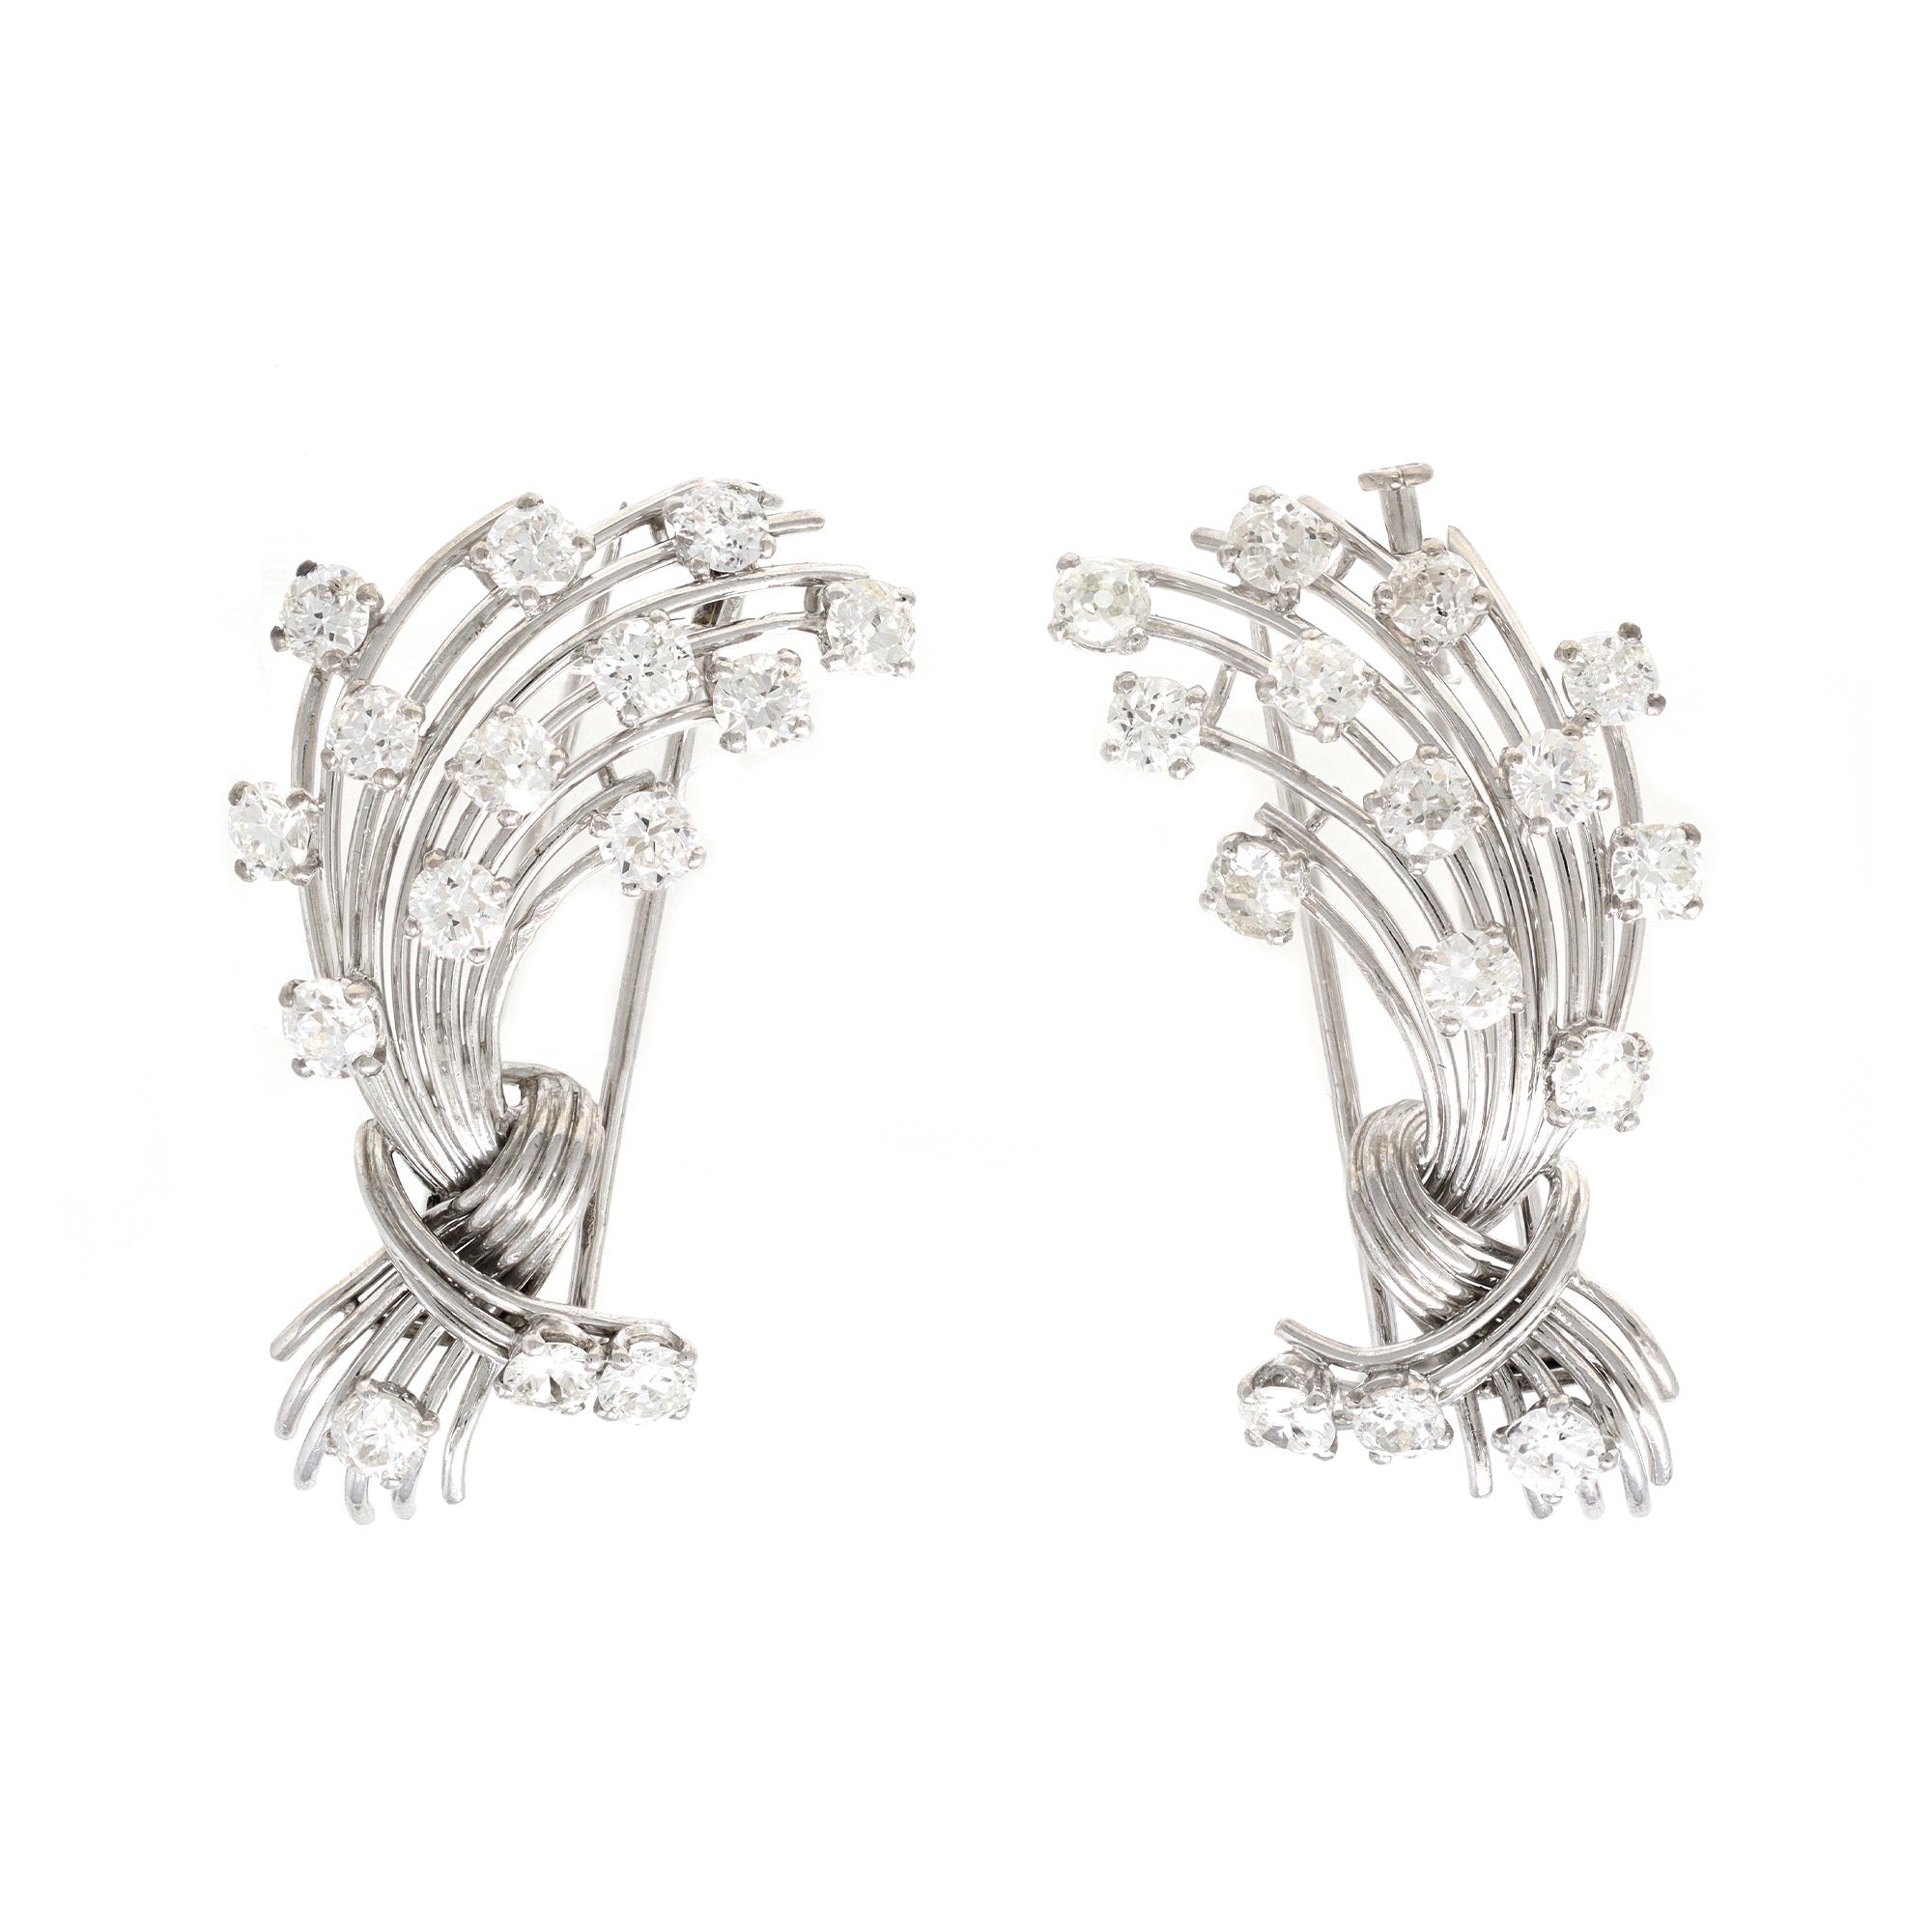 Signed Mauboussin Paris Pair of Clips in Platinum and 18k front view